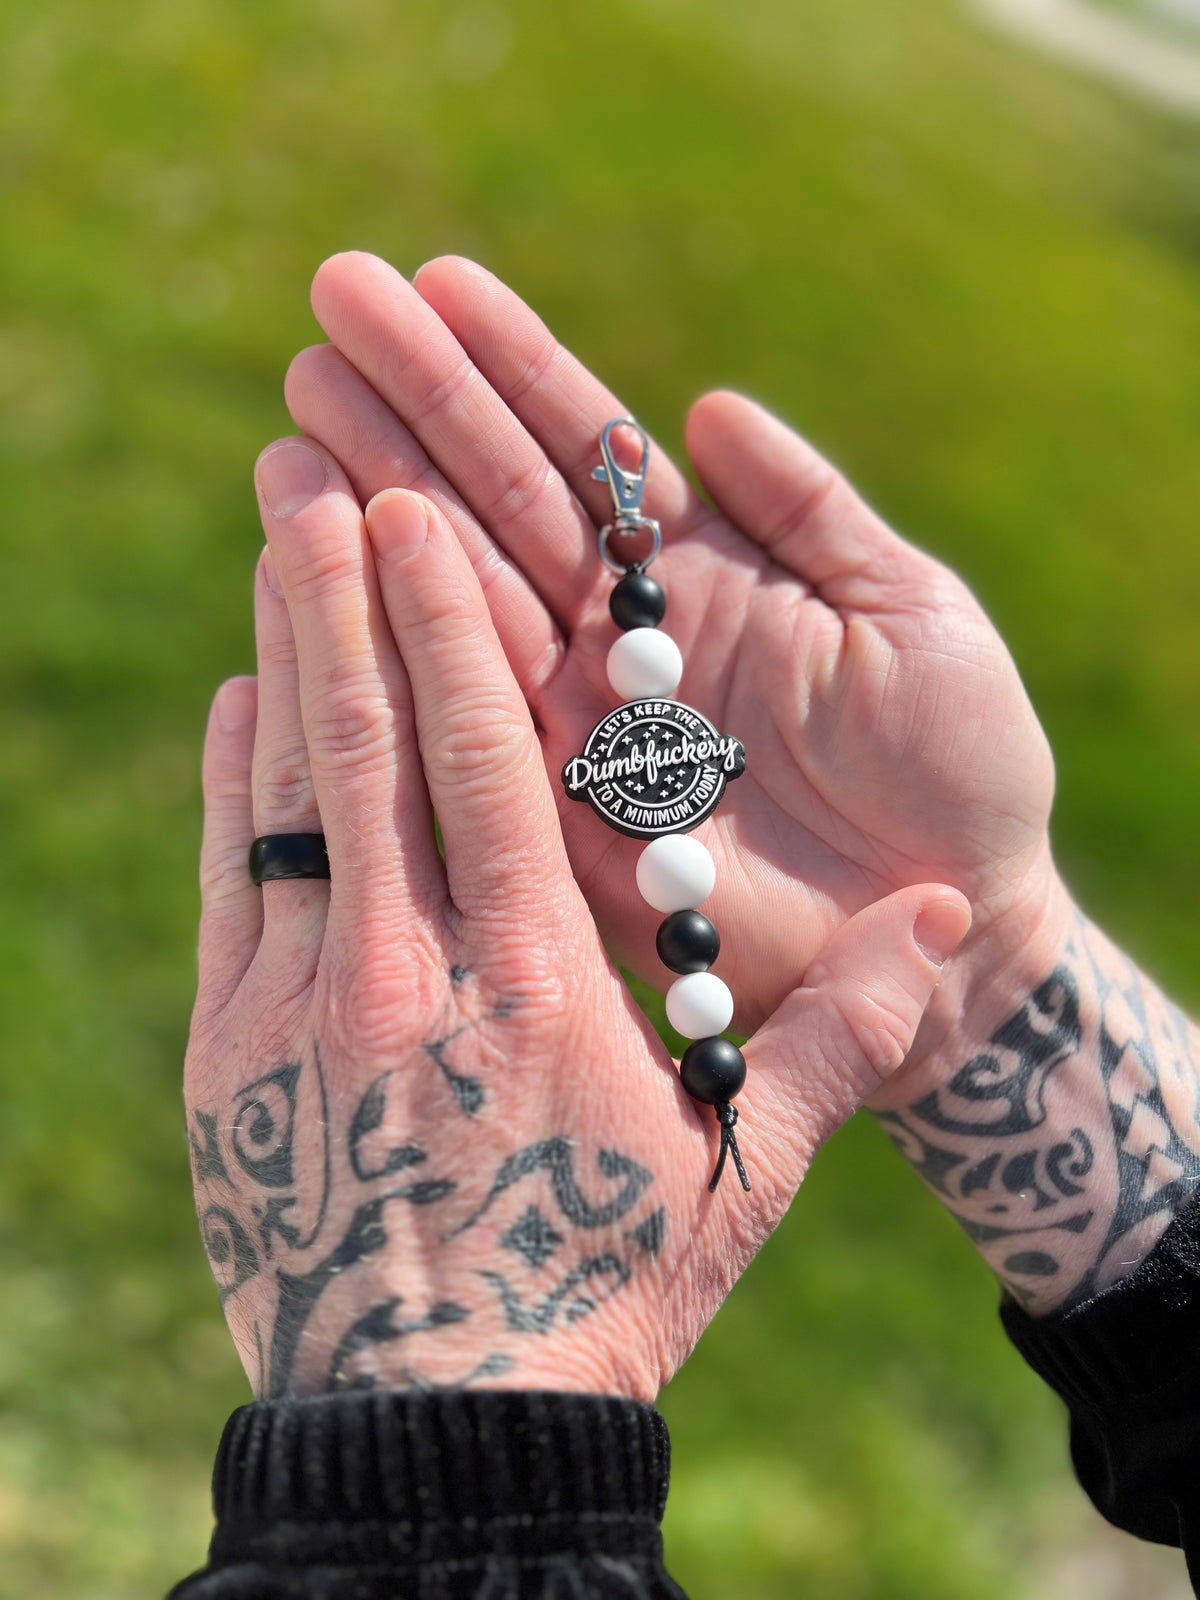 Tattooed mens hands holding a Black & White Let's Keep the Dumbfuckery to a Minimum Today Silicone Bead Keychain